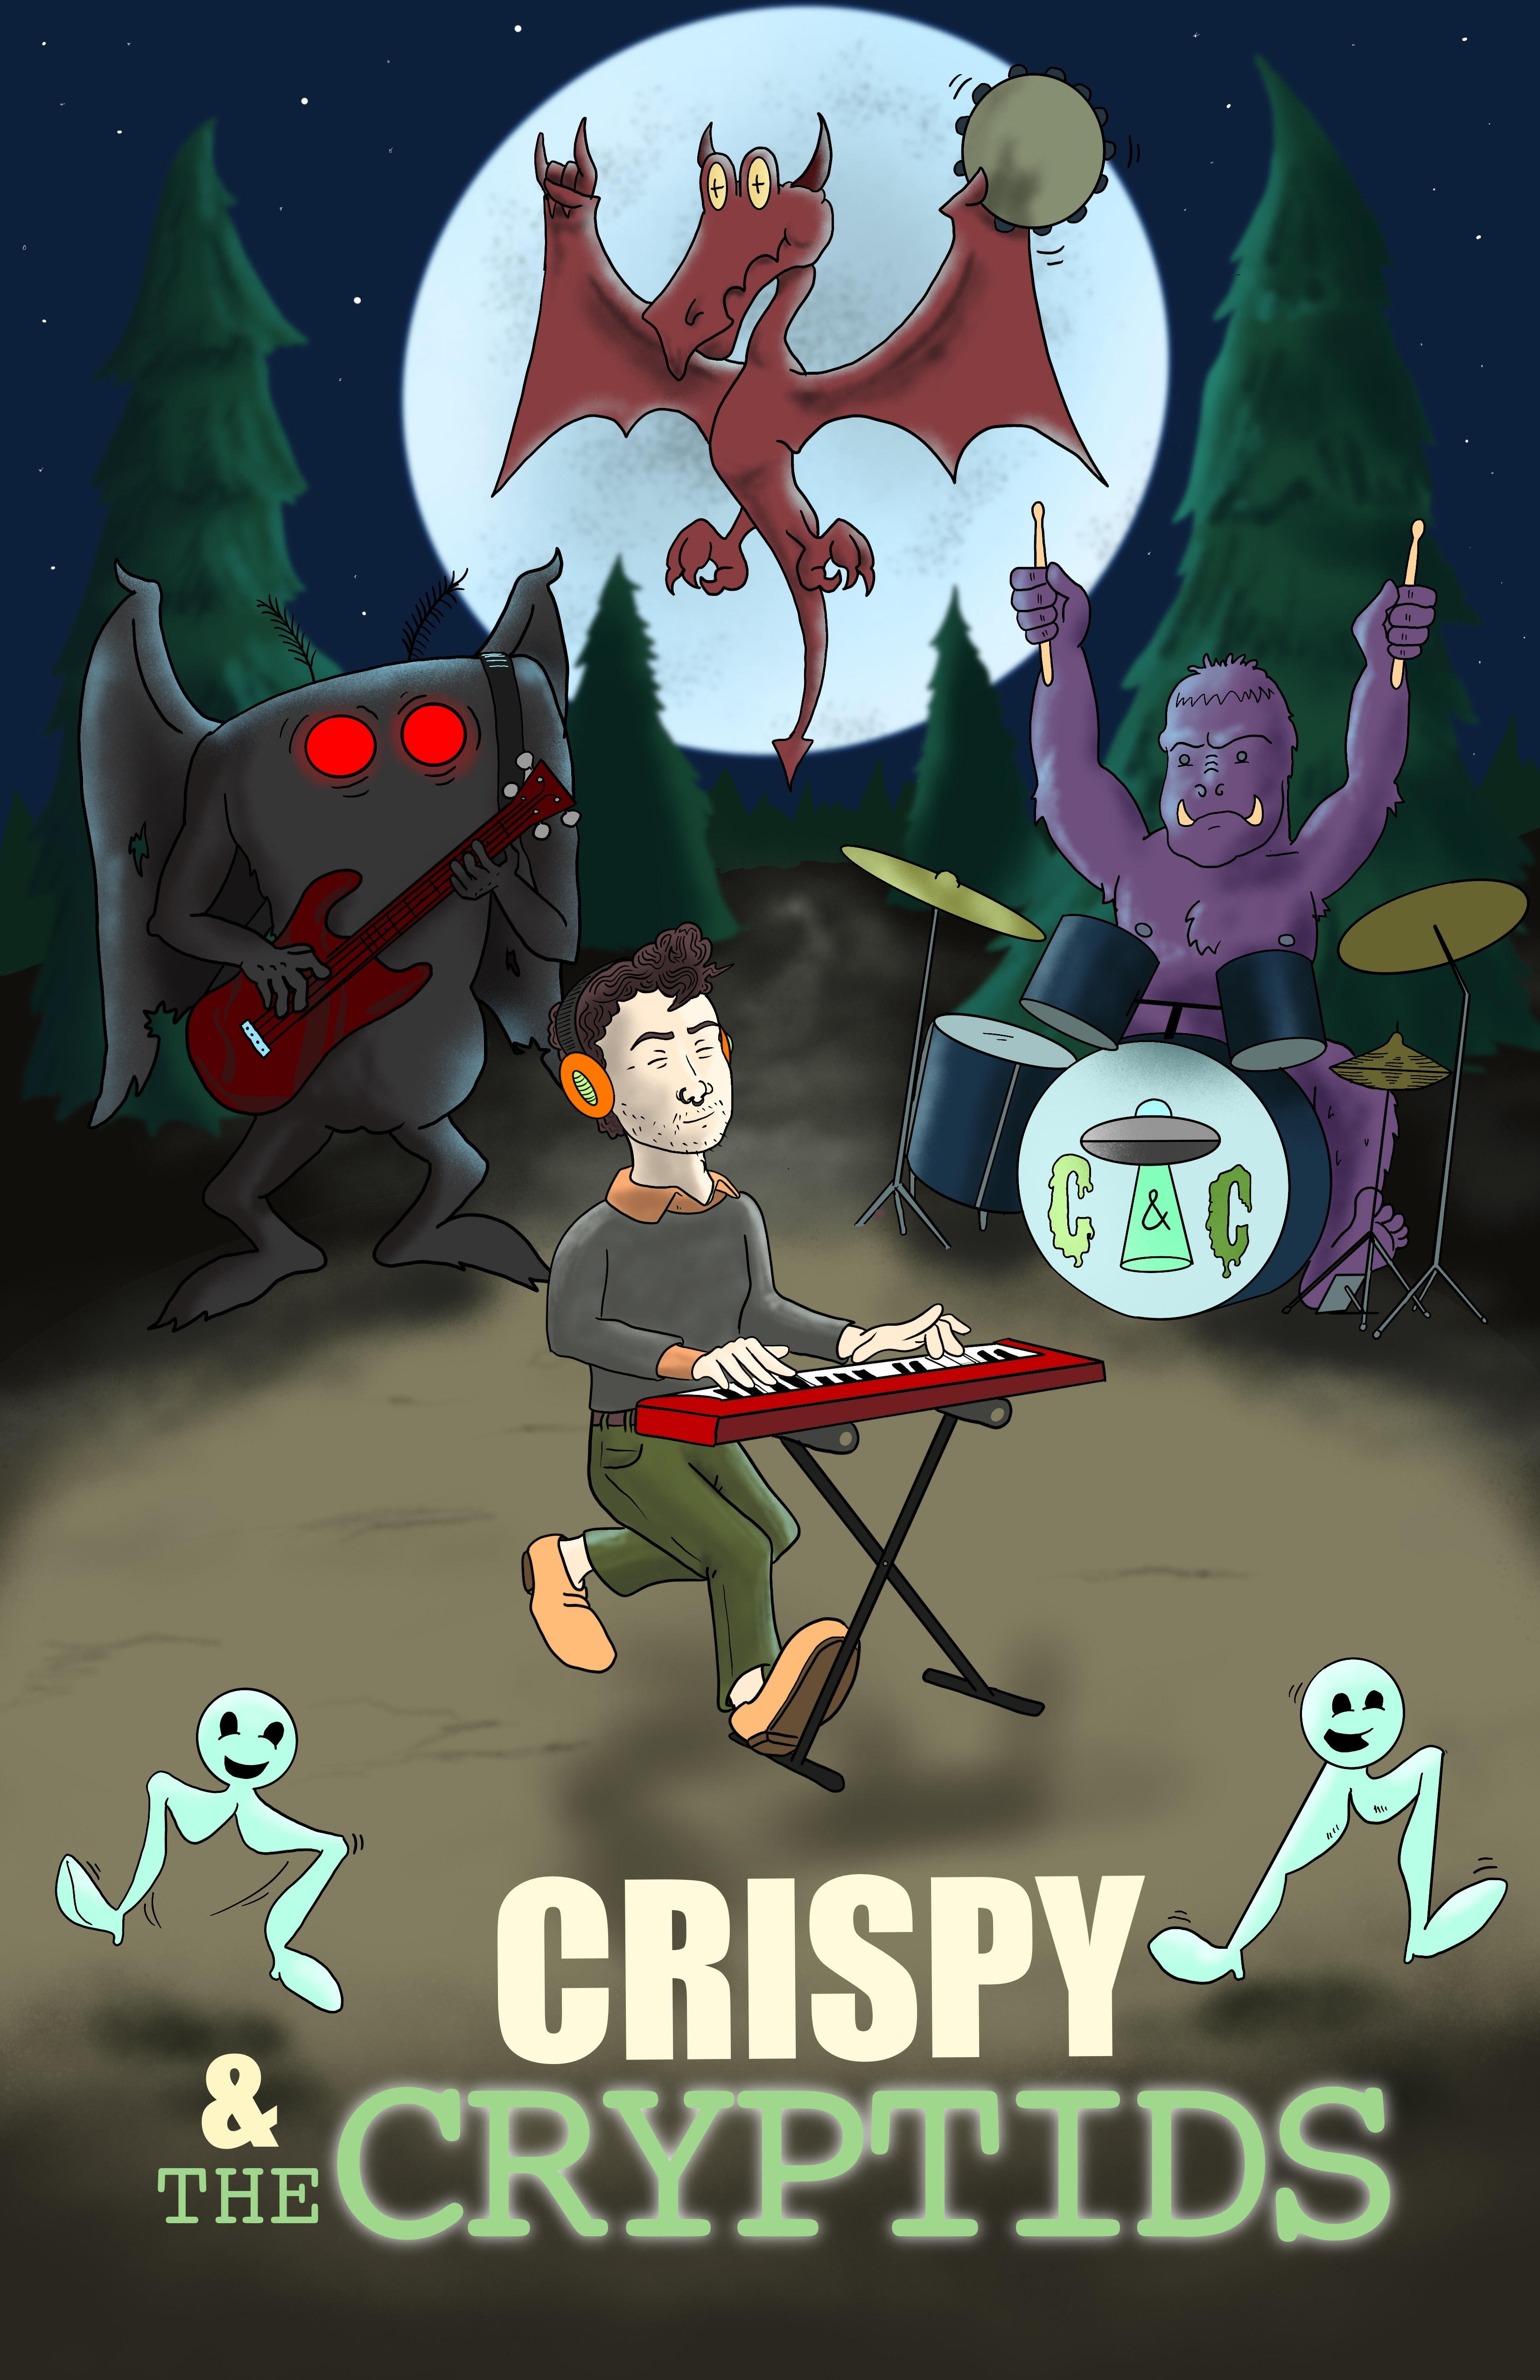 Crispy and the Cryptids